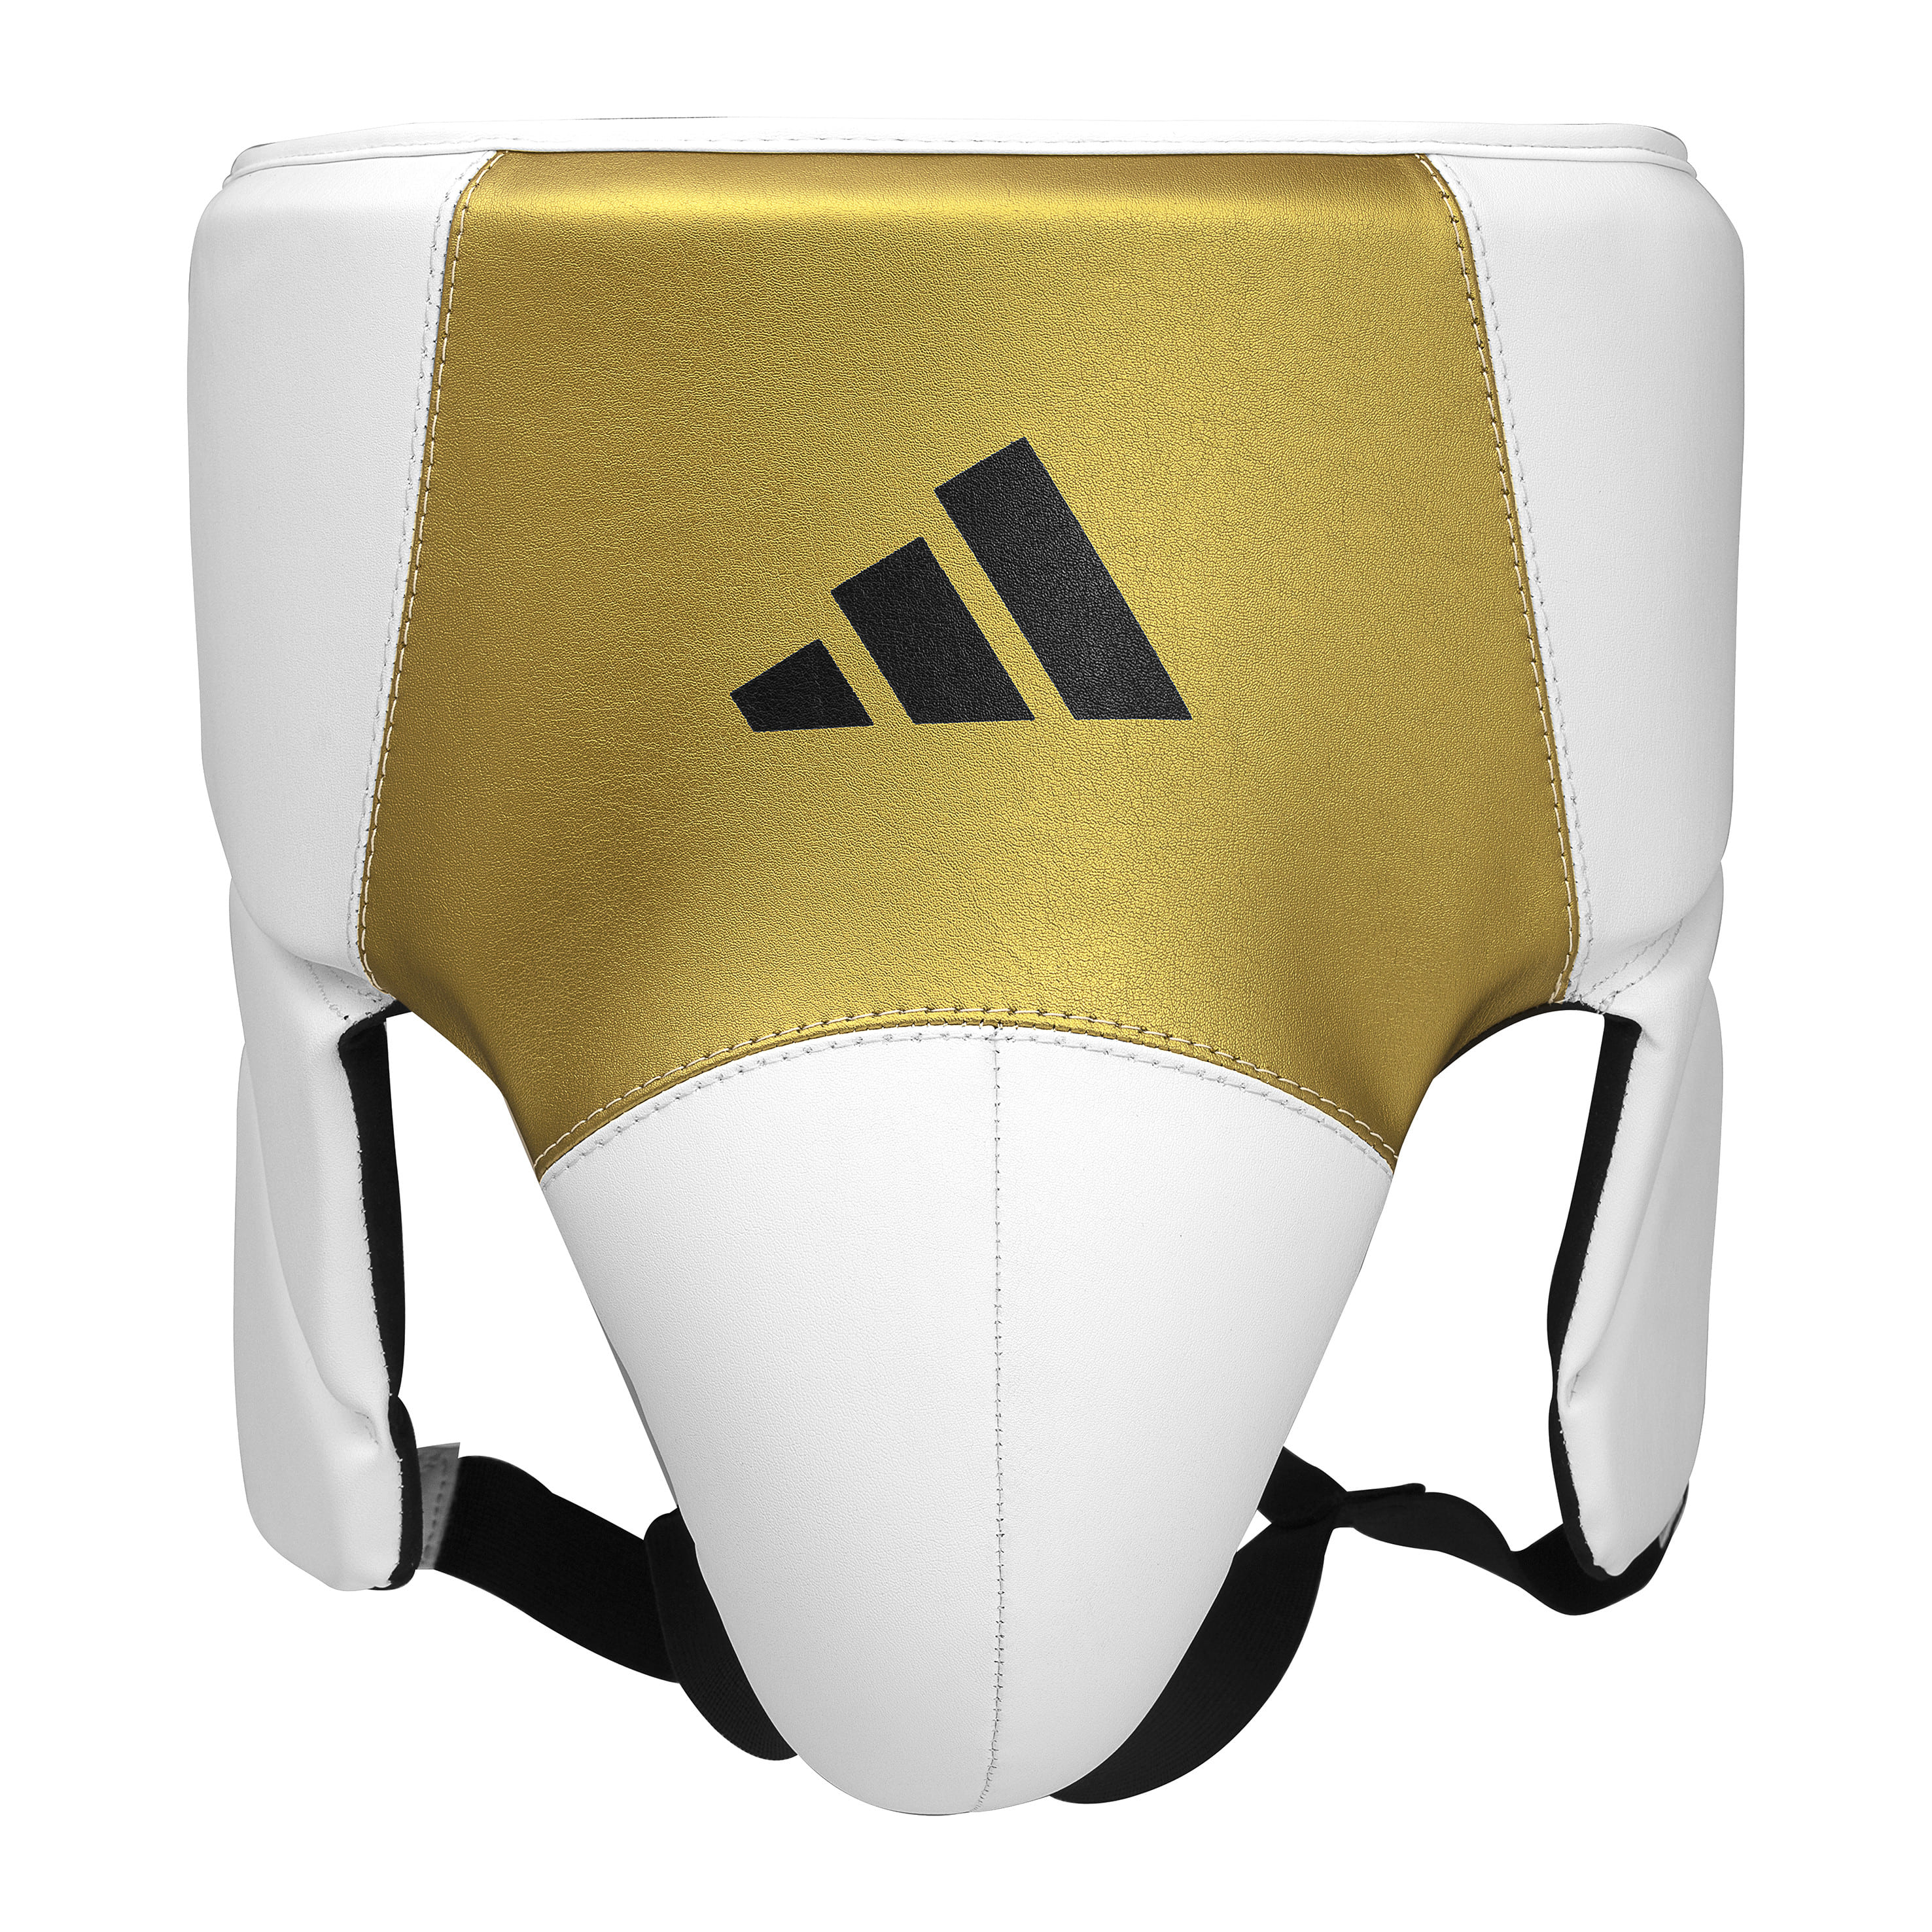 Pro Speed Groin Guard - WHITE/GOLD